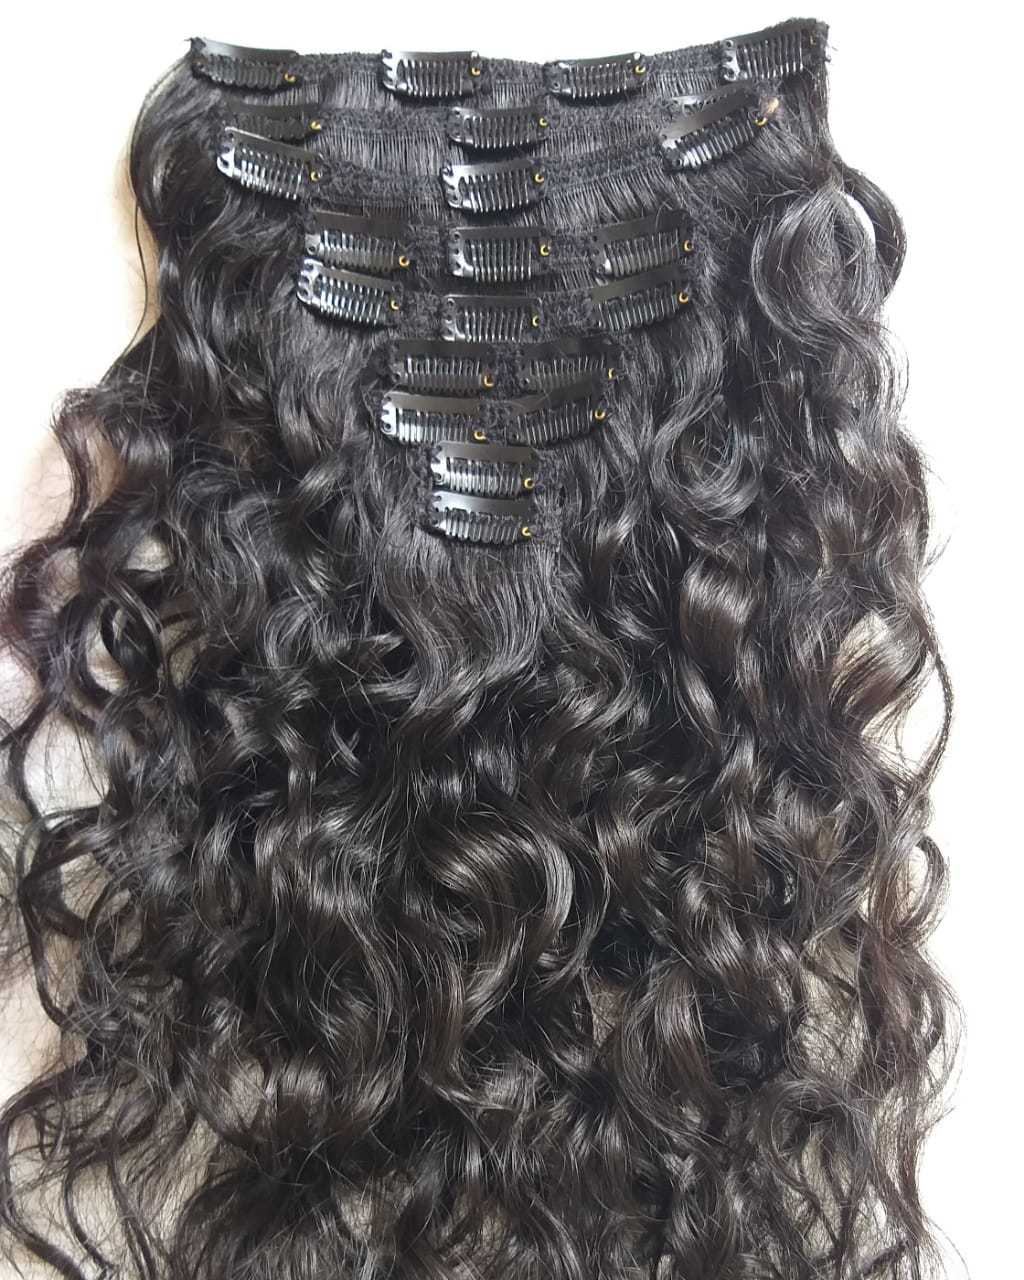 Indian Curly Clip In Hair